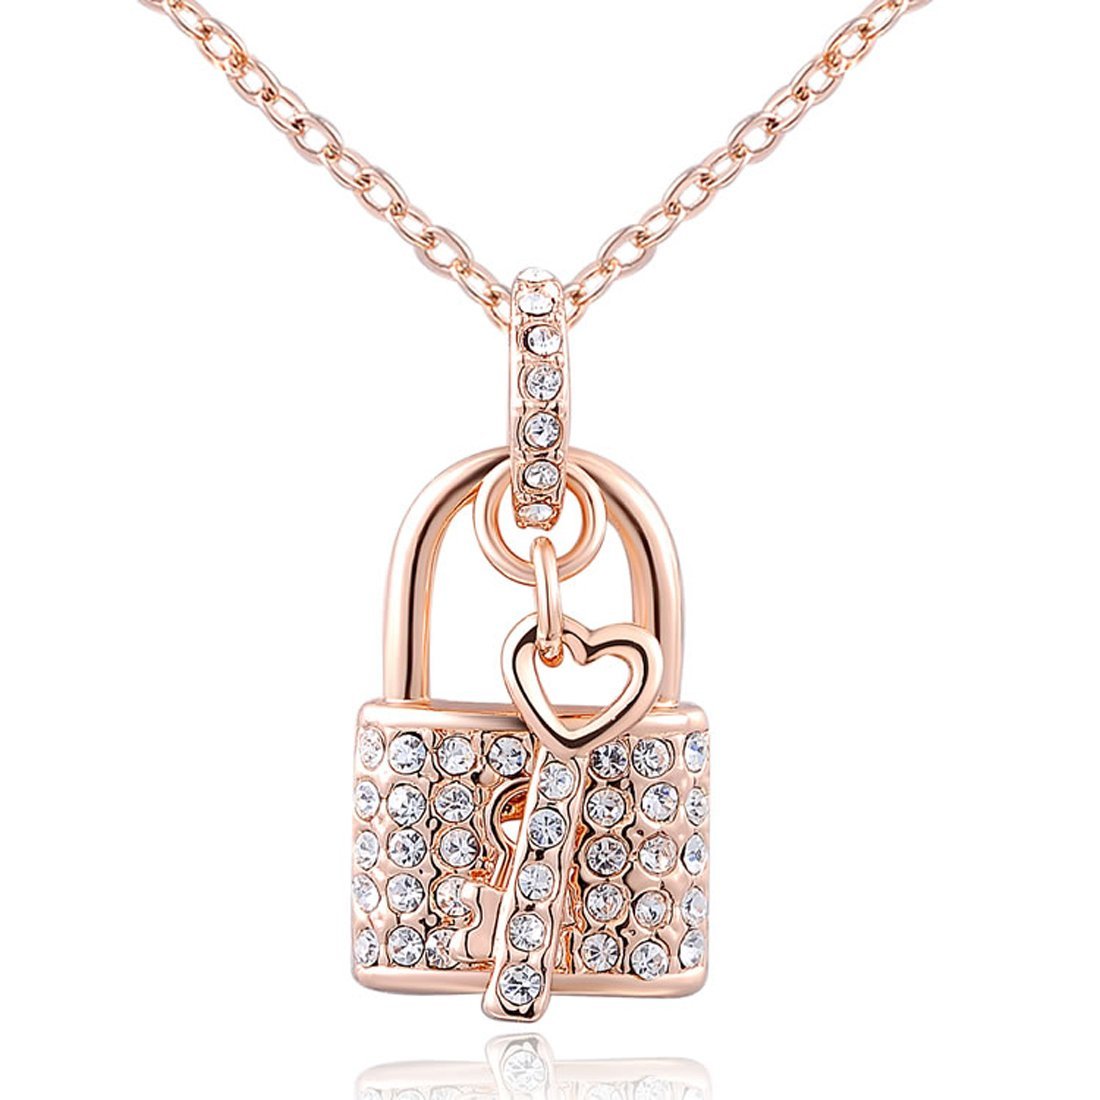 Book Cover joyliveCY Women Lock & Key Gold Plated Necklace Rose Gold Chain Necklace